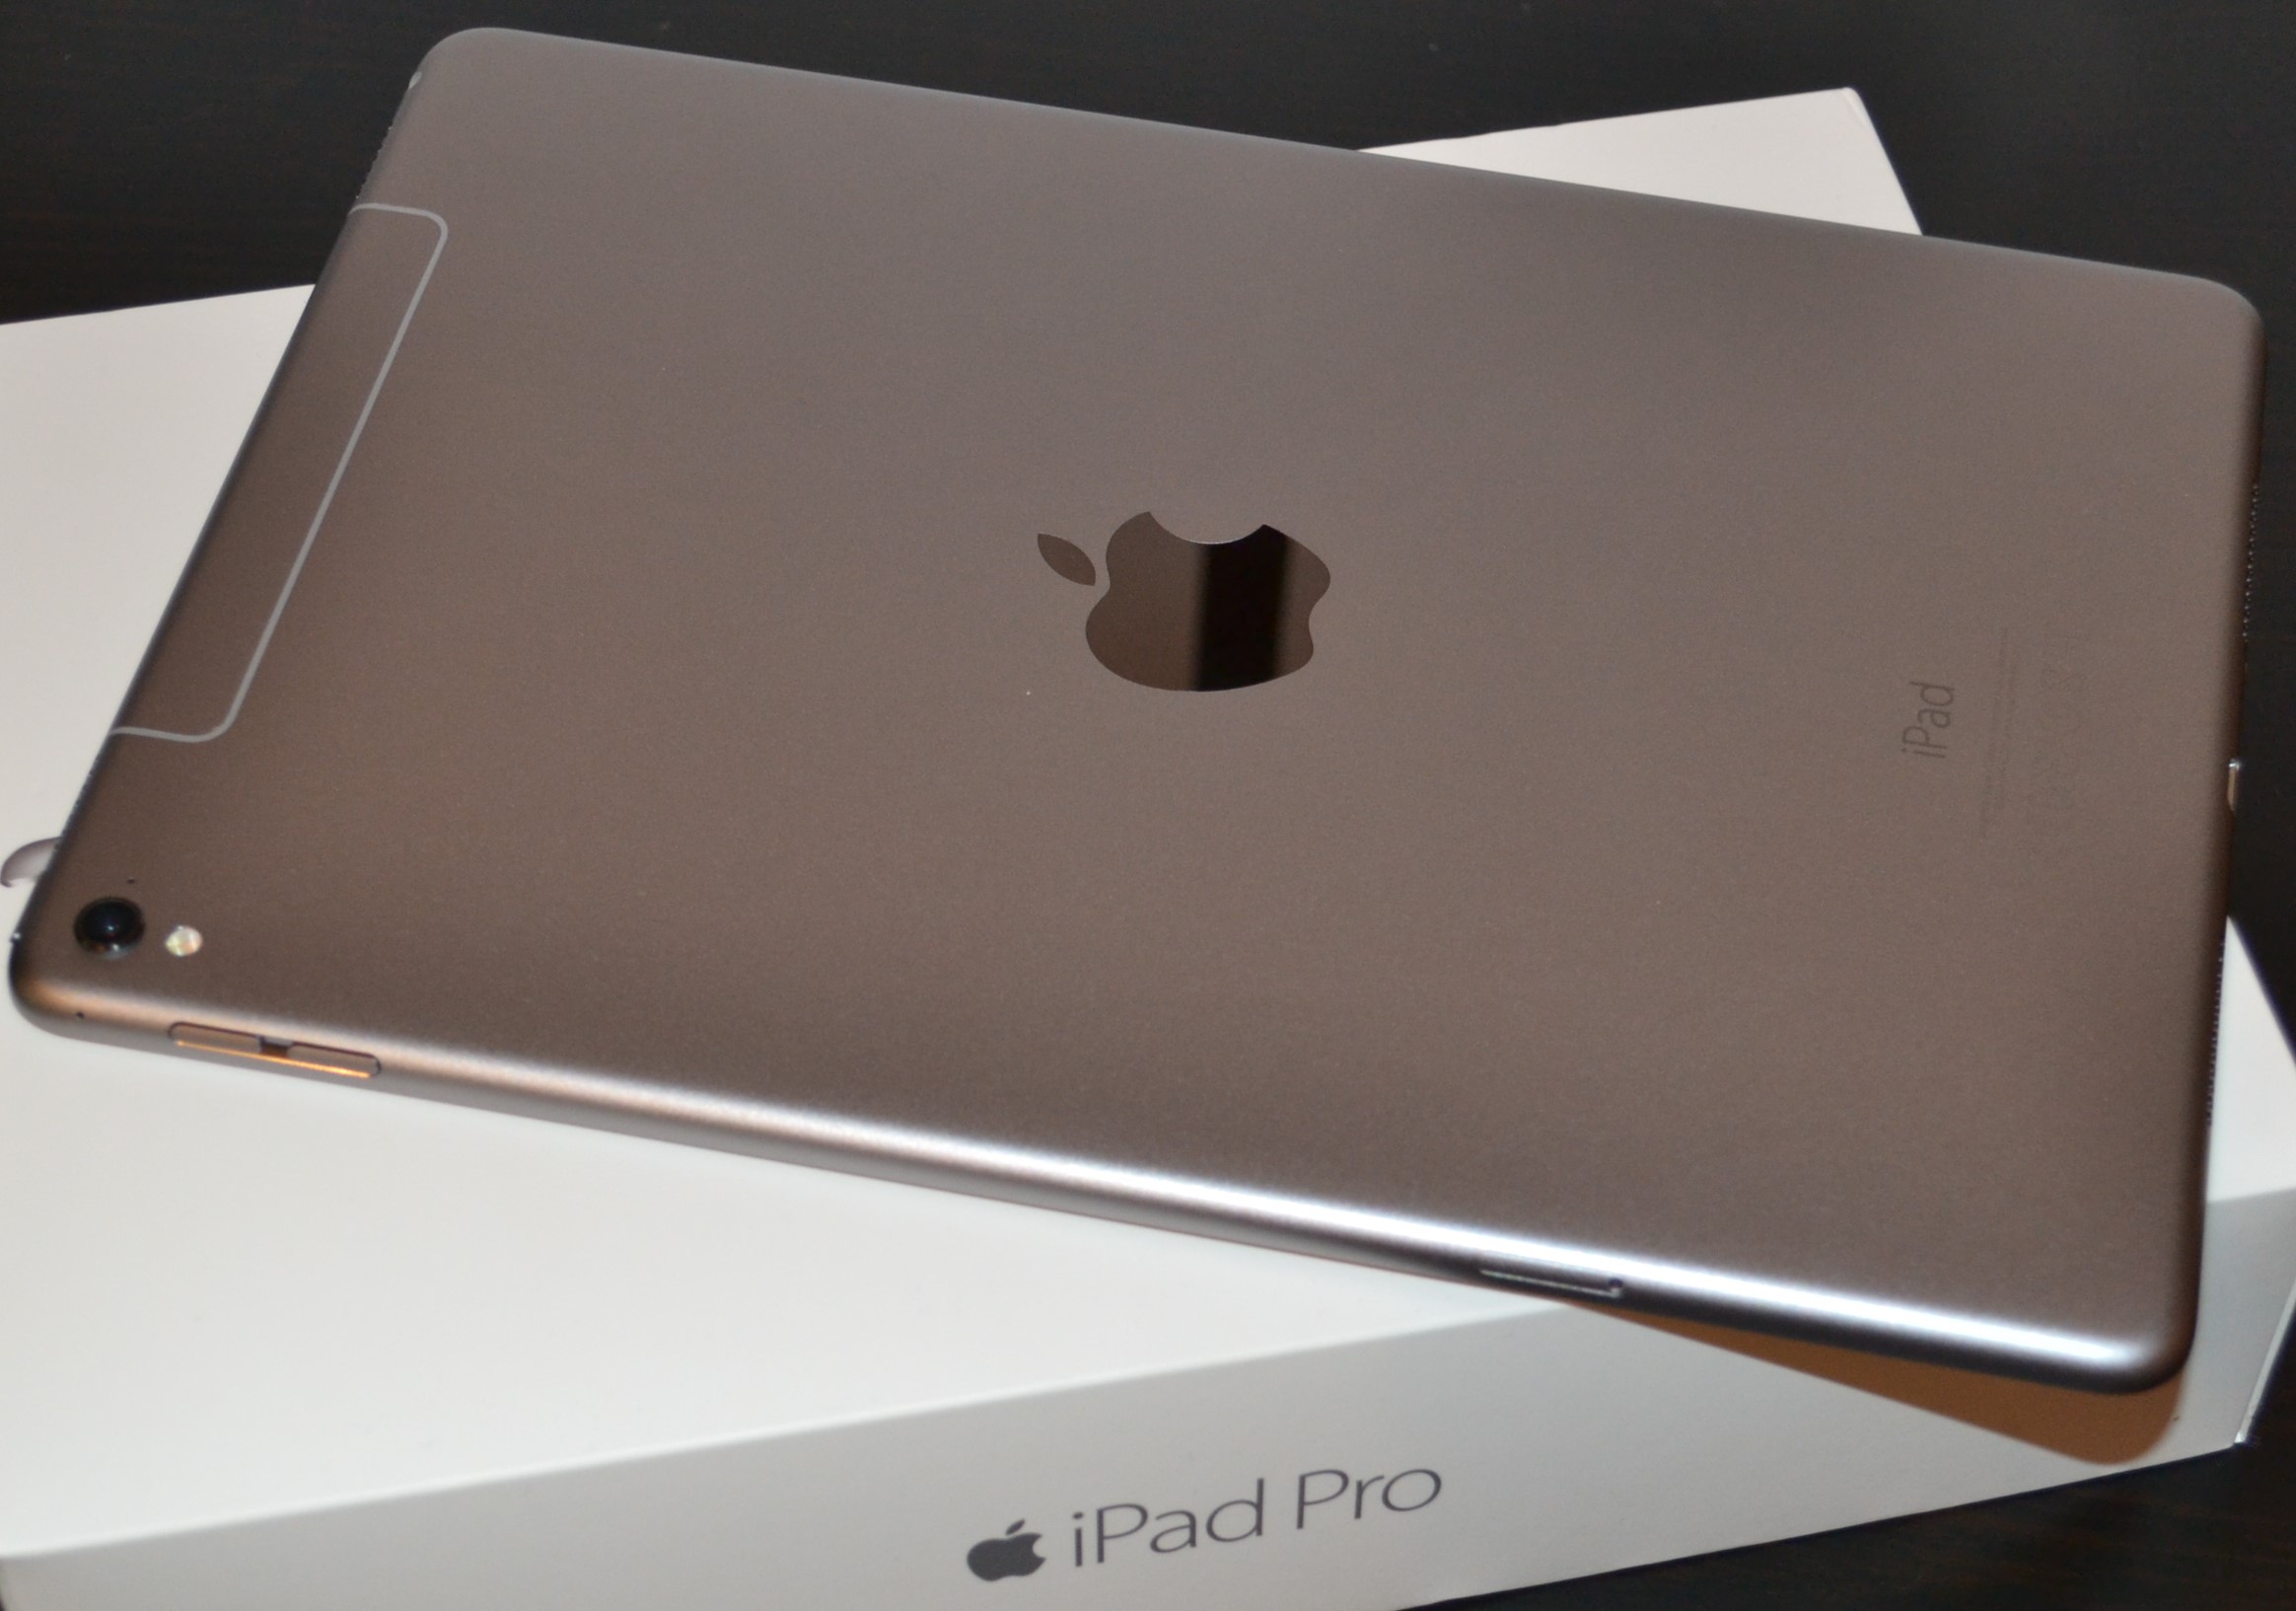 ipad pro 9.7 tommer anmeldelse 1